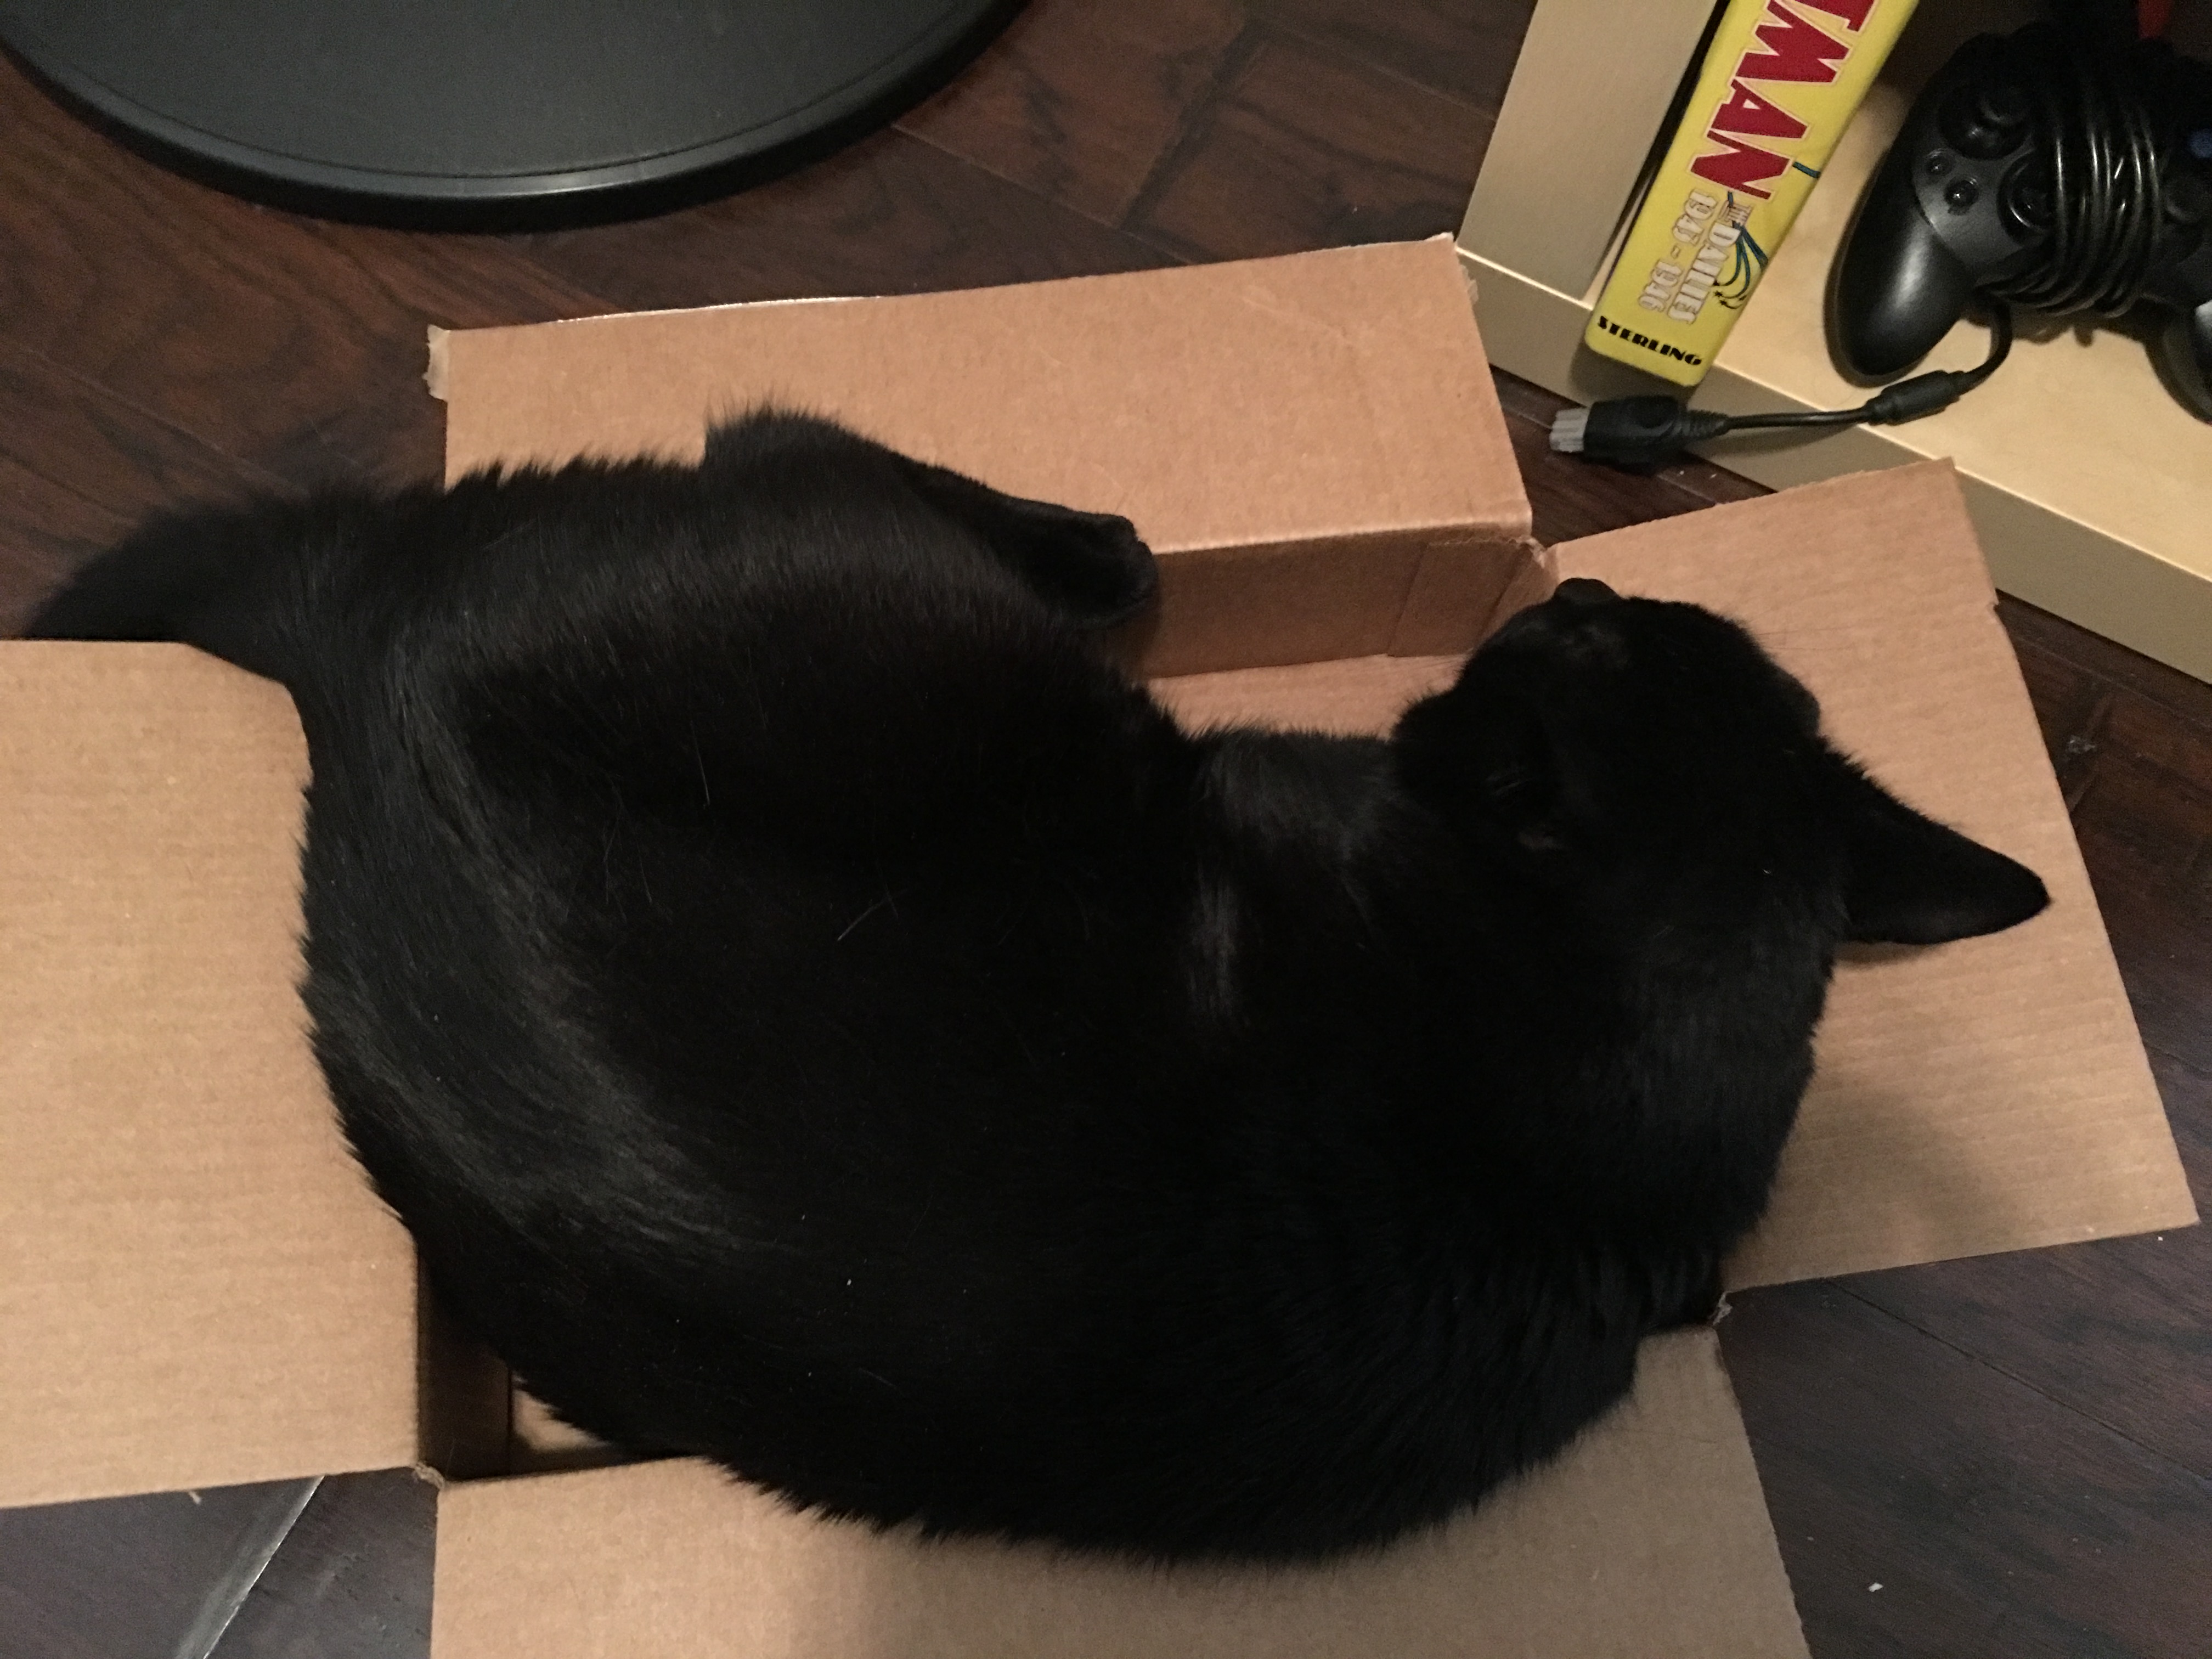 Manny sleeping in one of the many boxes we had around the house for him. He clearly doesn't fit, but that isn't bothering him